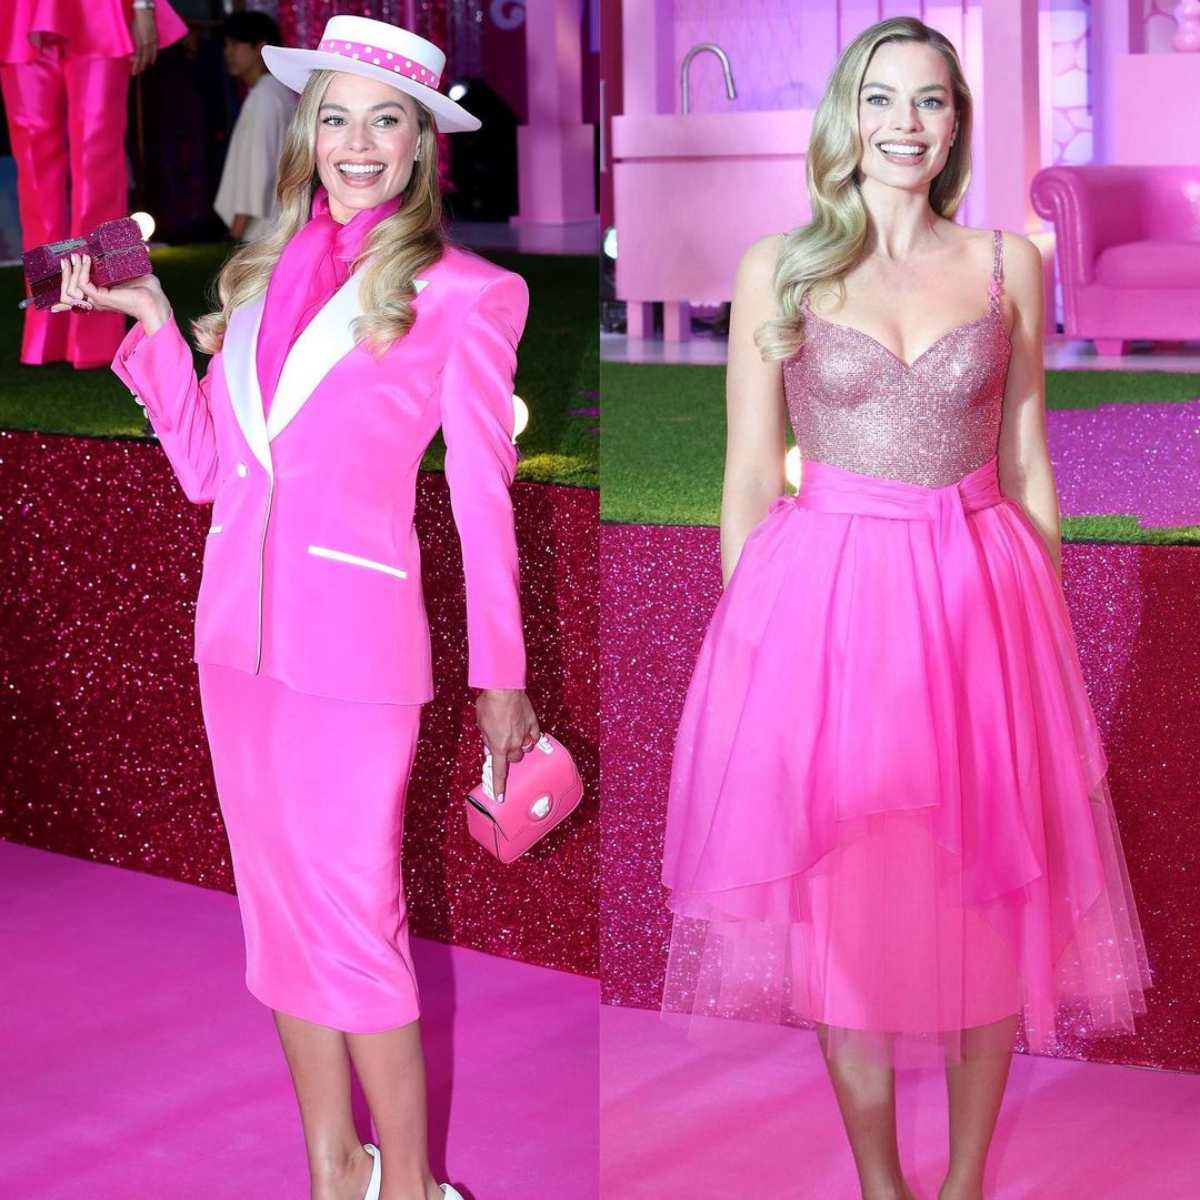 Margot Robbie Pops in Pink Minidress at 'Barbie' London Photo Call